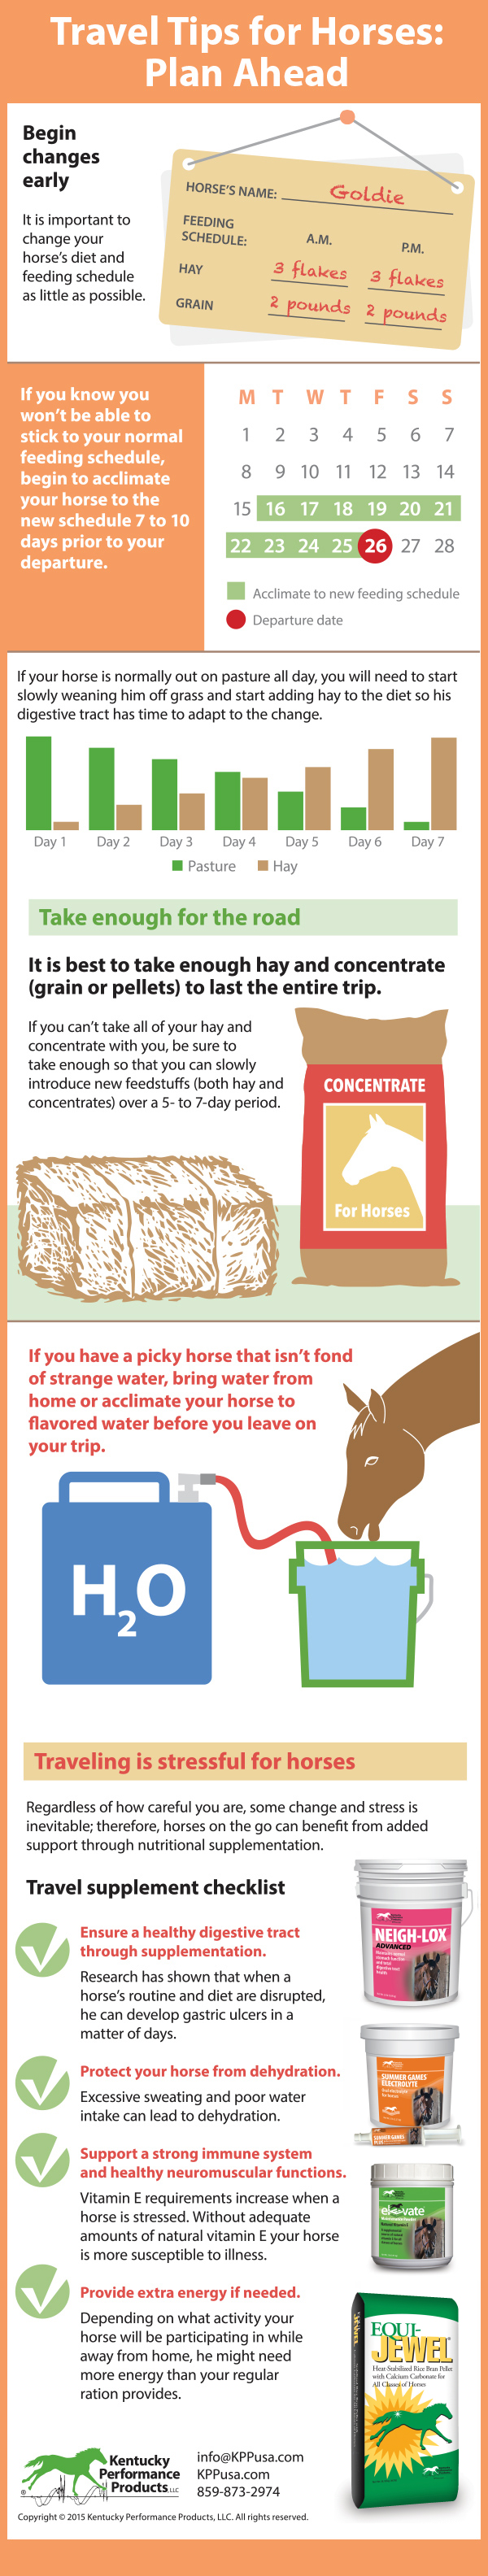 Travel-Tips-for-Horses-Part-1-Plan-Ahead-15-174